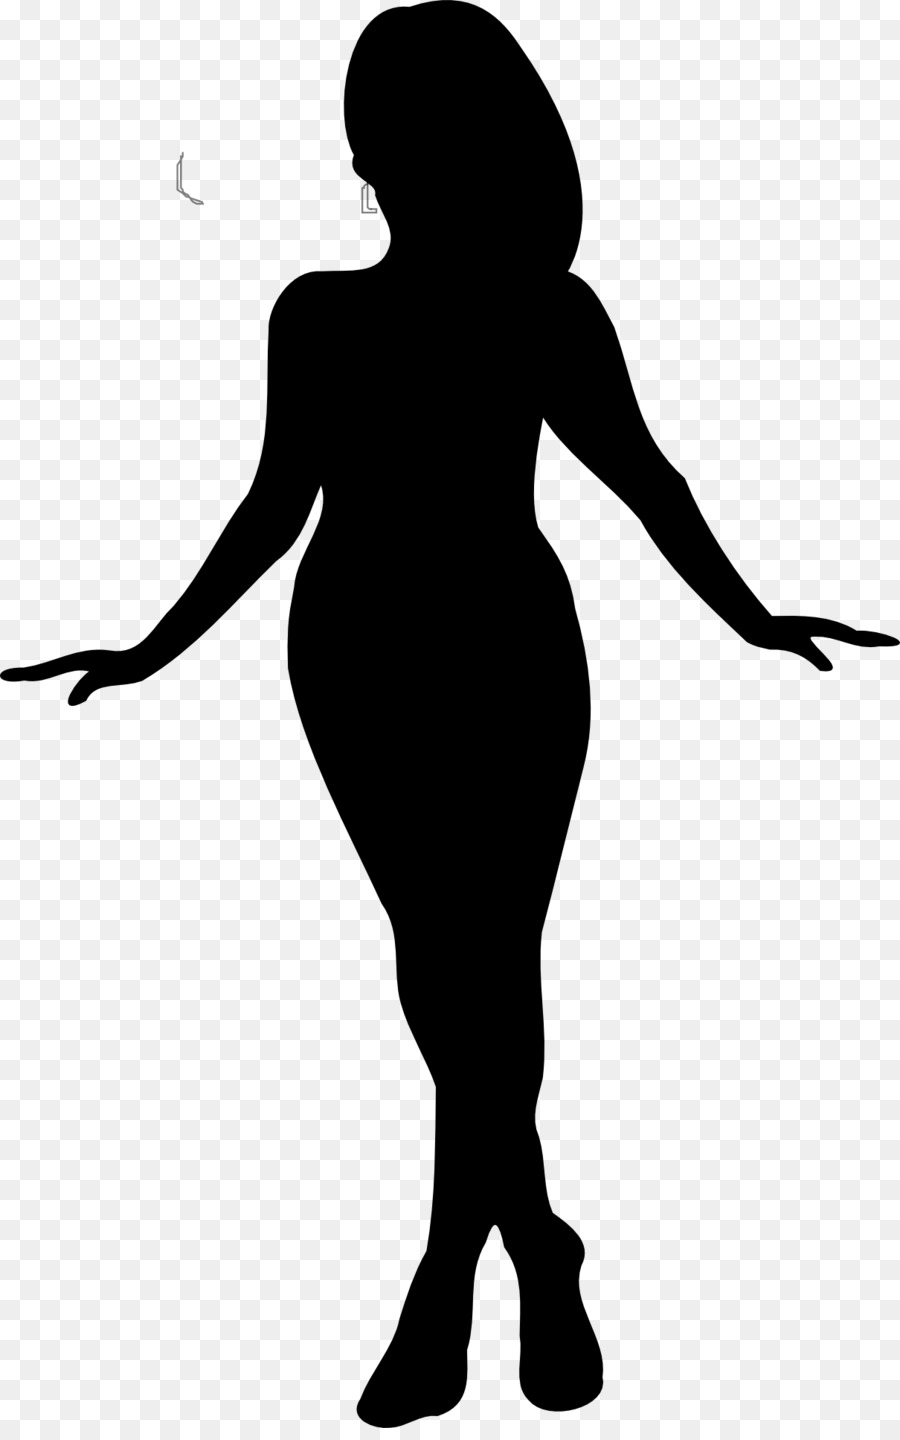 Free Elegant Lady With Hat Silhouette, Download Free Elegant Lady With ...